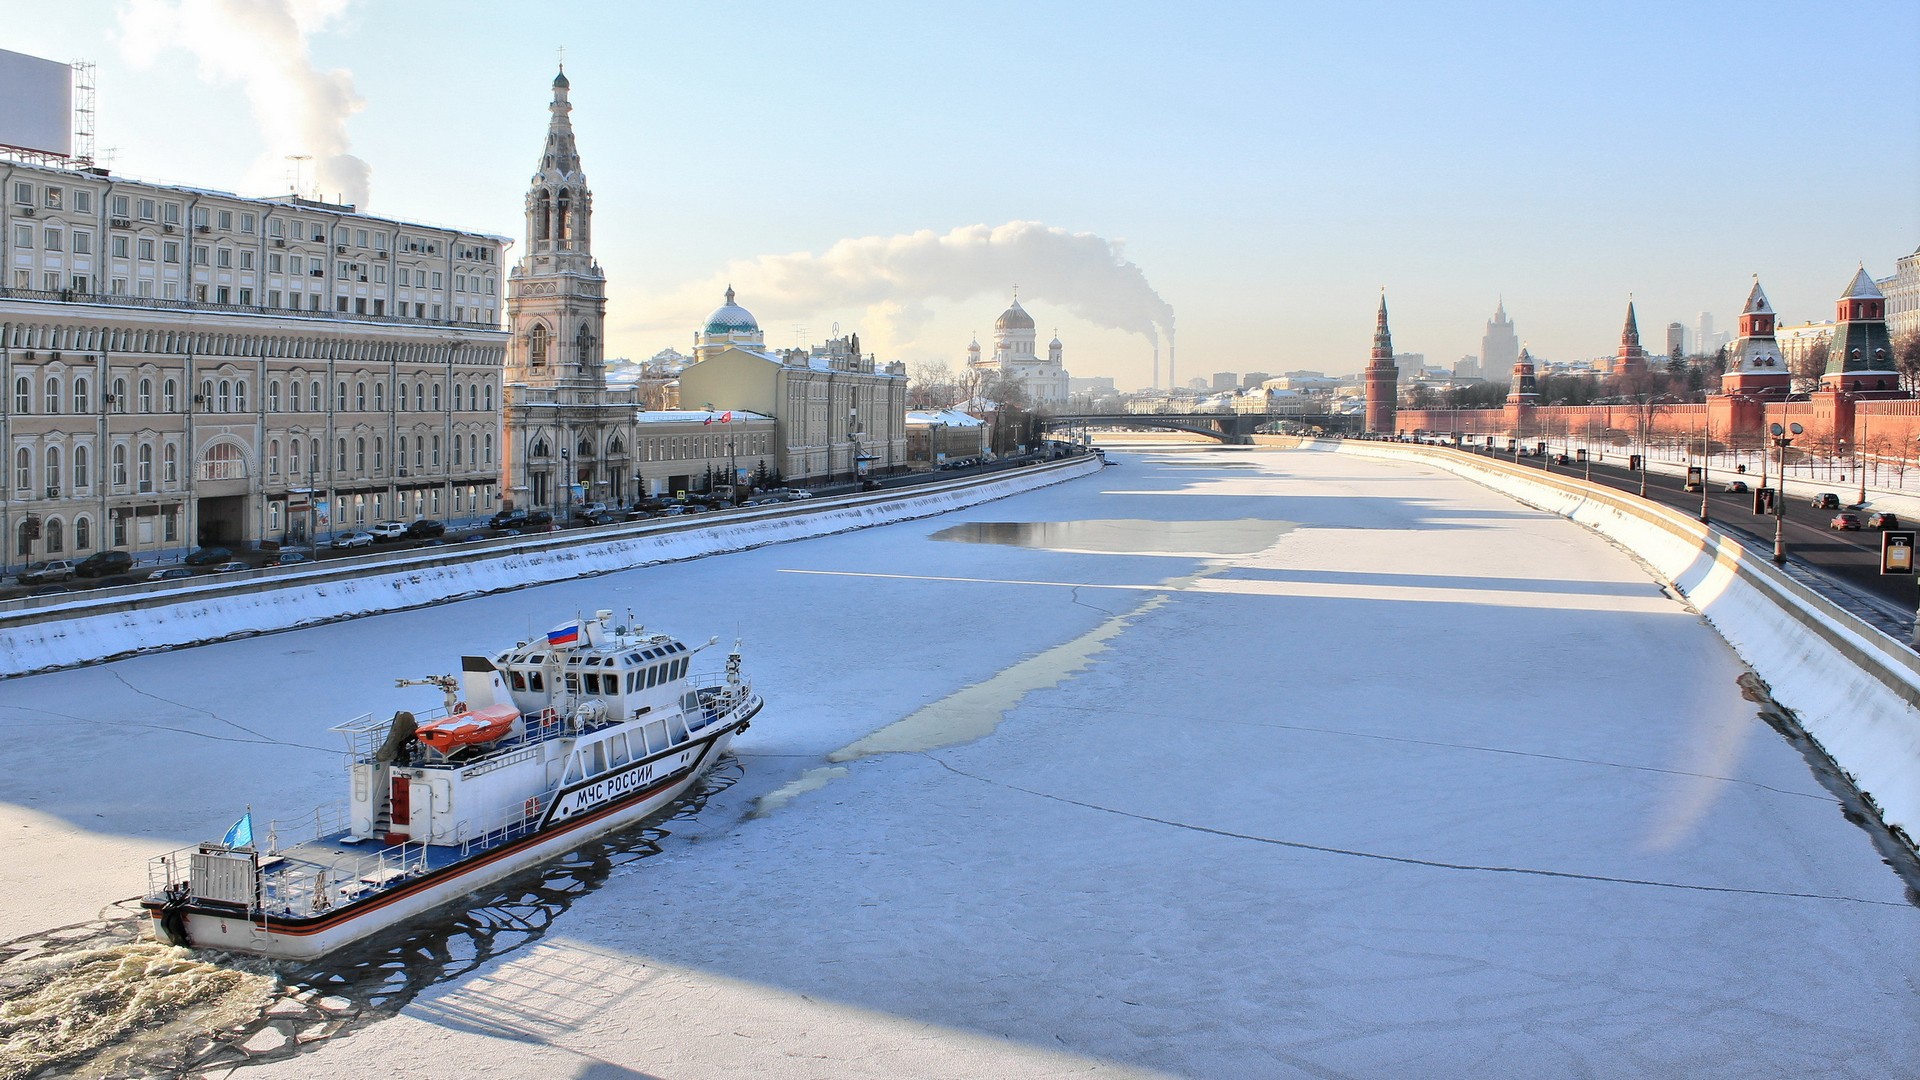 General 1920x1080 river ice snow boat building architecture Moscow city cityscape capital tower bridge old building Russia ship icebreakers winter smoke cathedral sunlight shadow street Kremlin